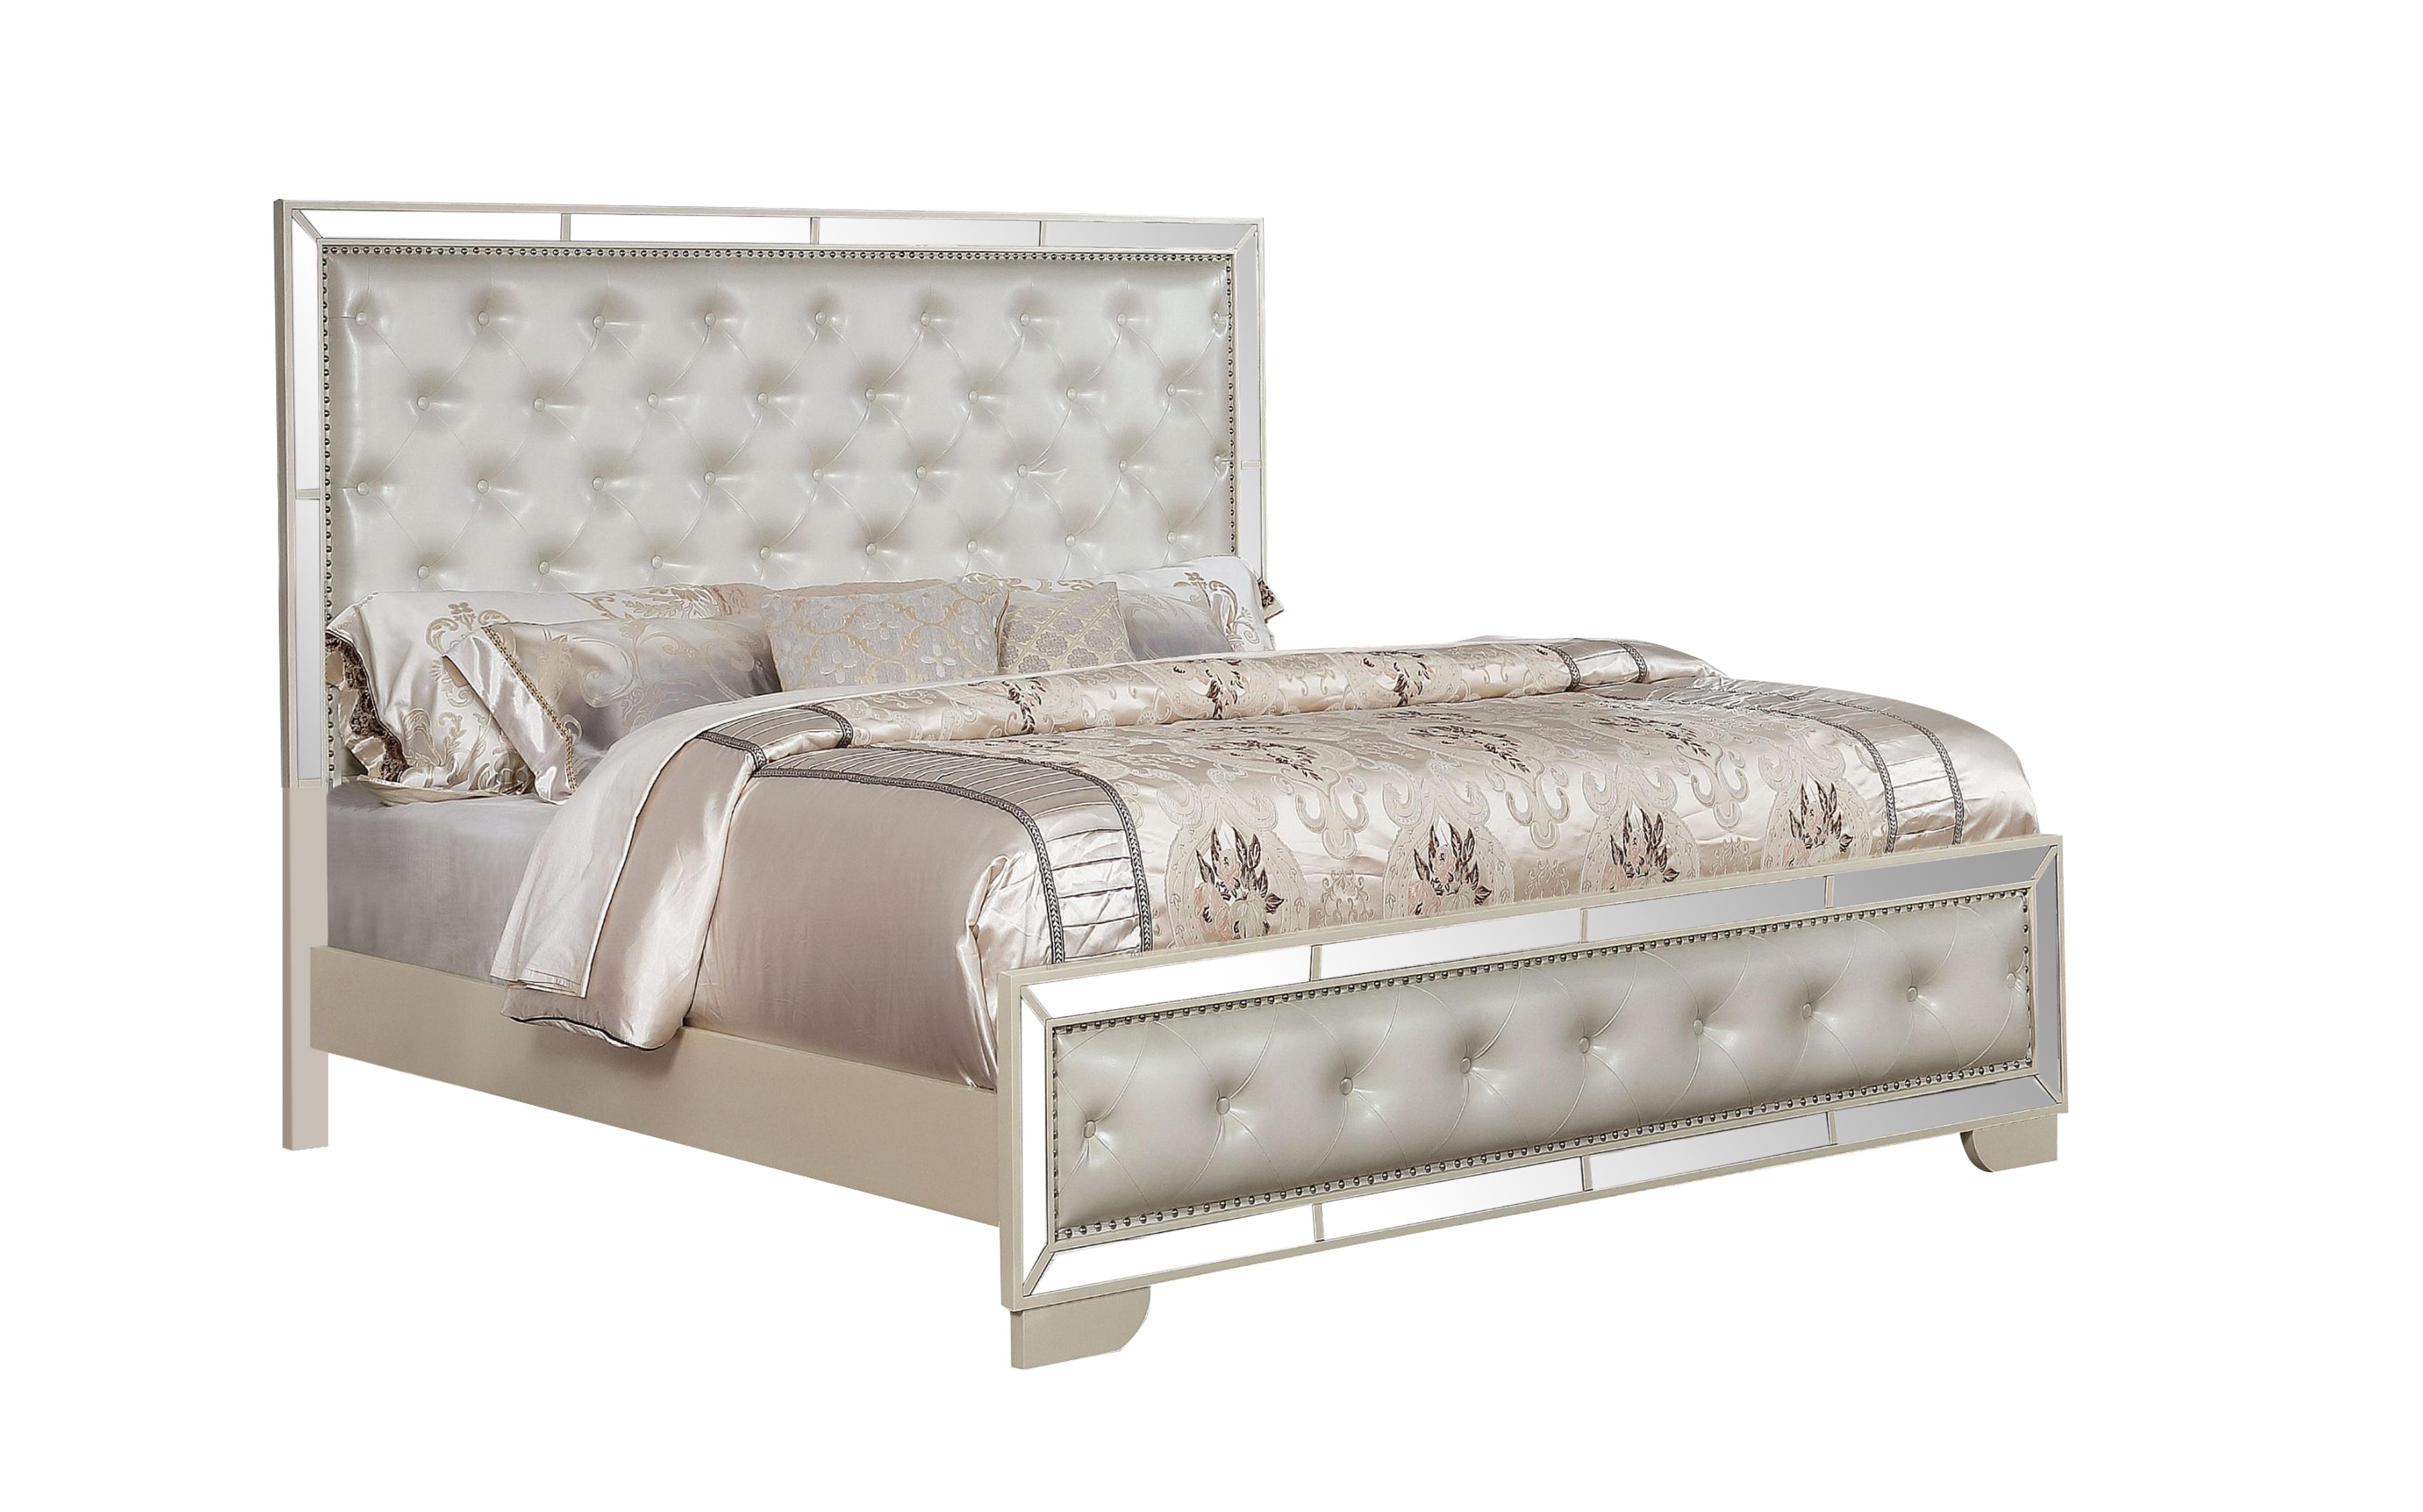 

    
Glam Beige Mirrored Inlay Tufted Queen Bedroom Set 4P MADISON Galaxy Home Modern
